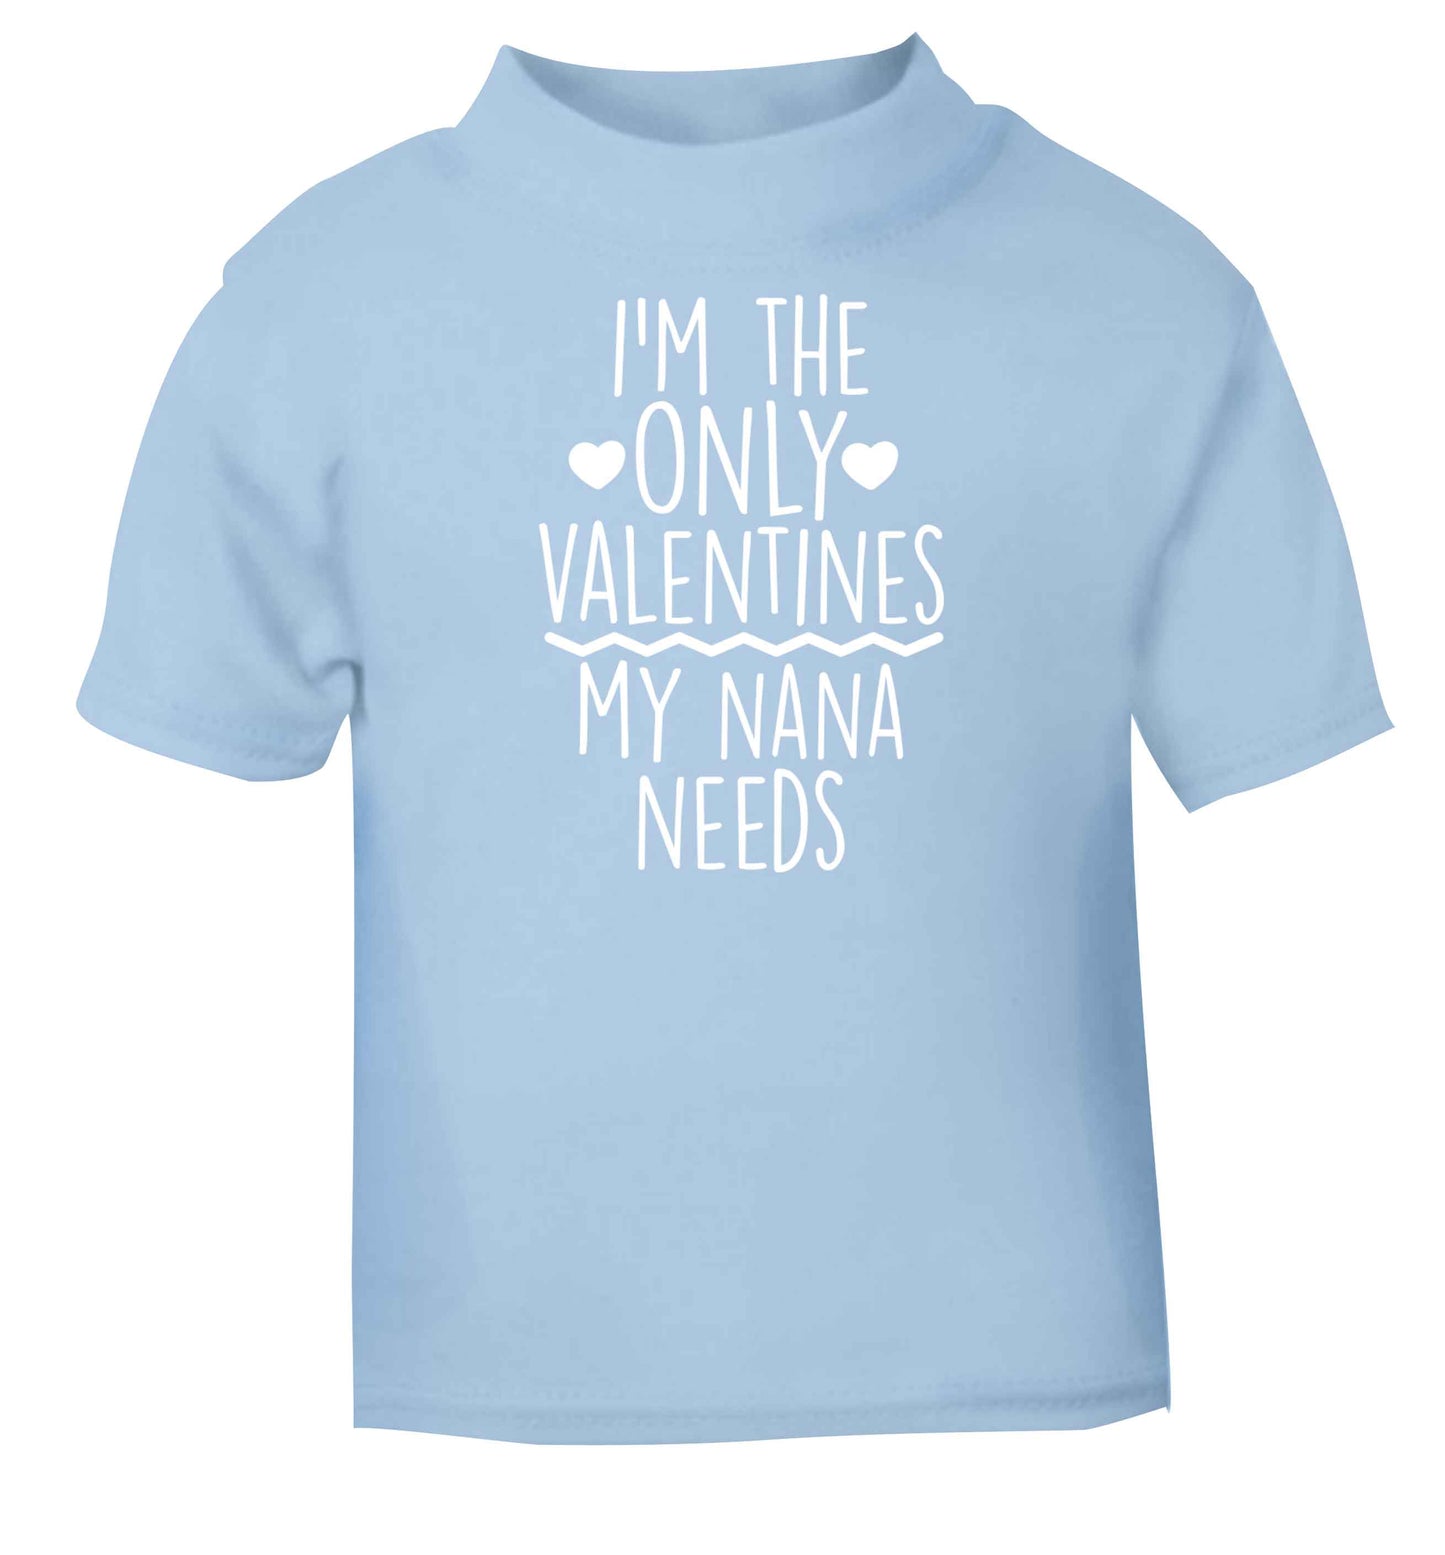 I'm the only valentines my nana needs light blue baby toddler Tshirt 2 Years